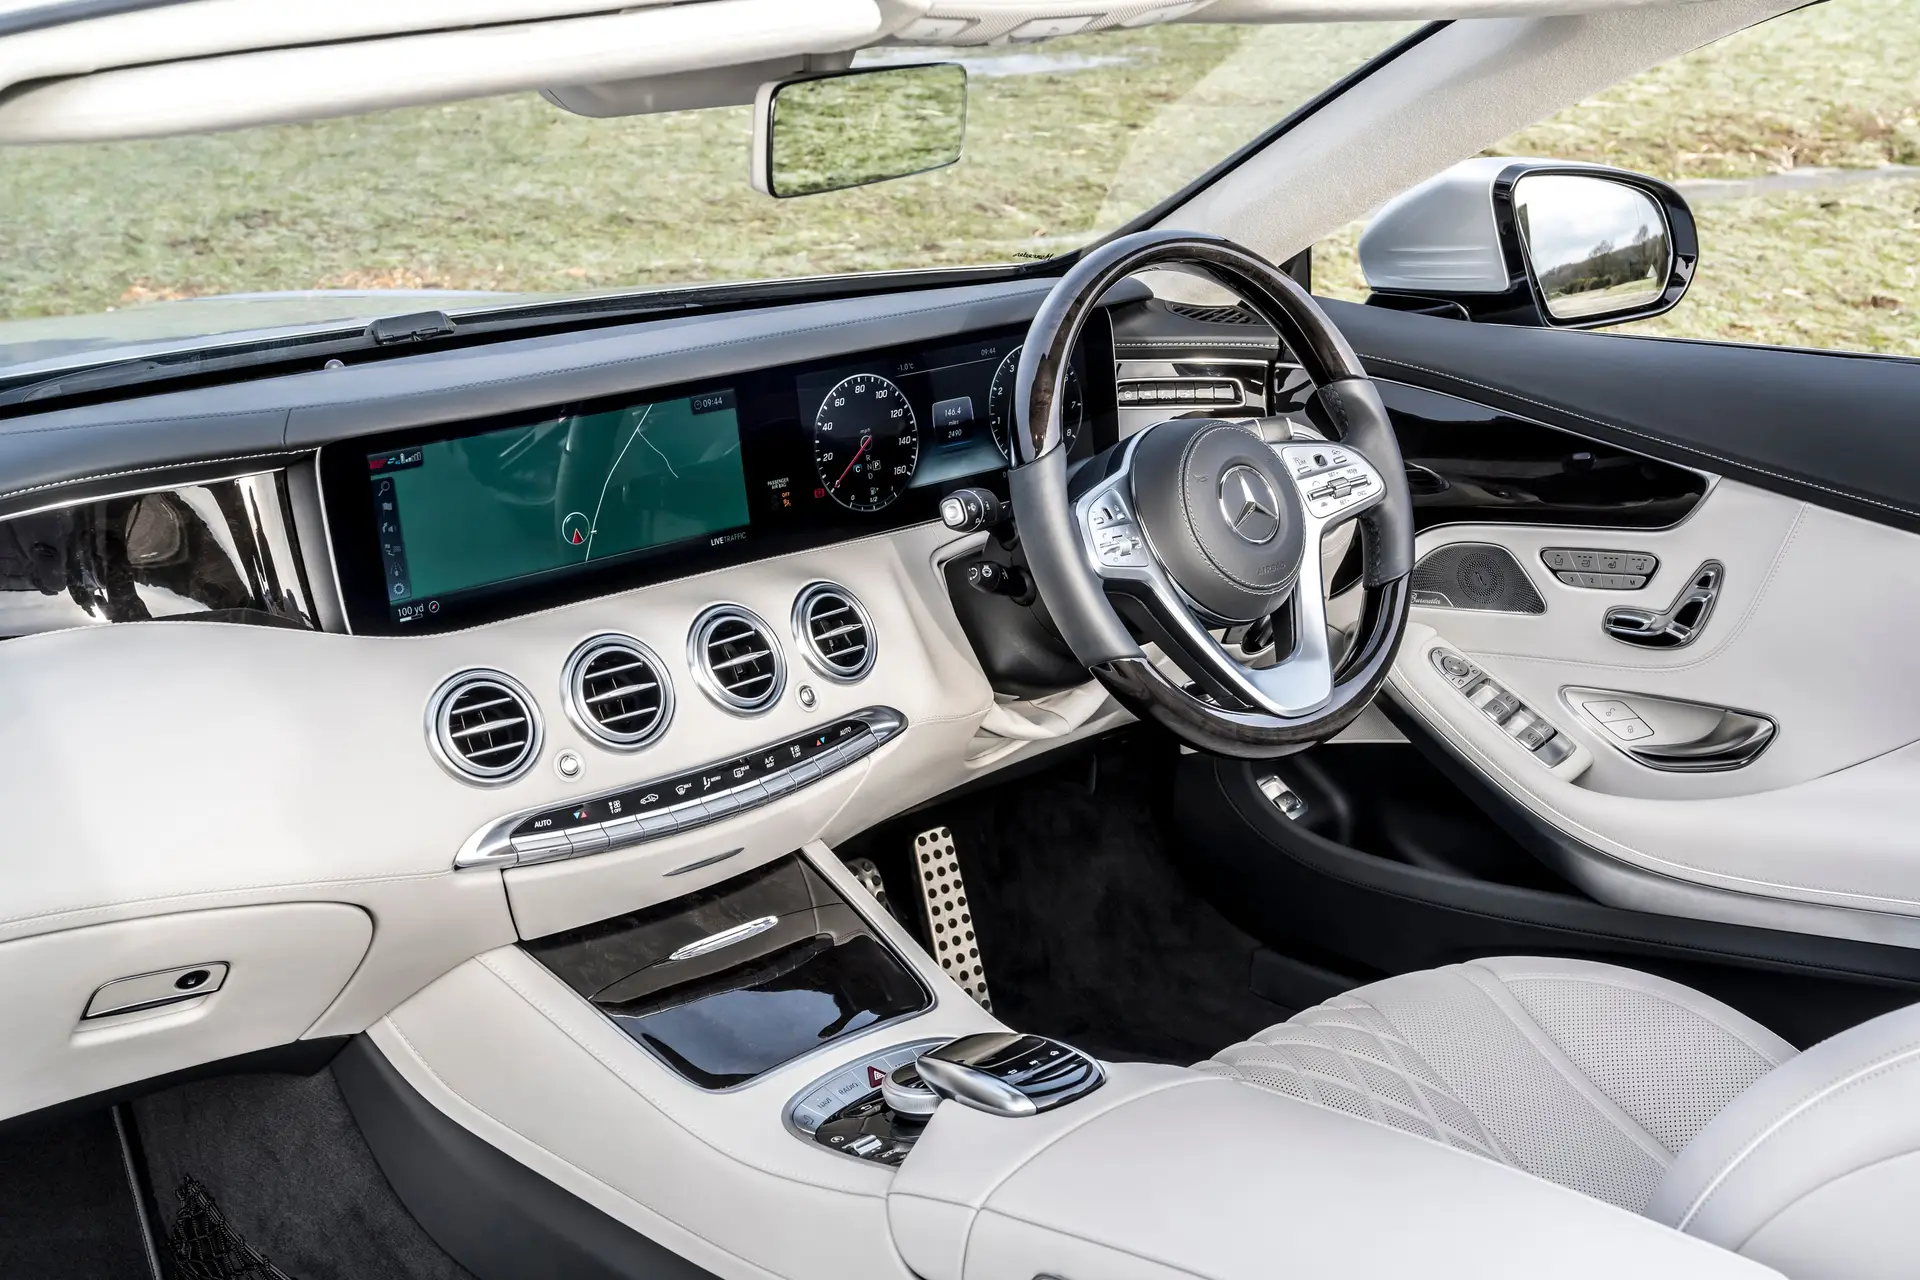 Mercedes-Benz S-Class Cabriolet (2016-2021) Review: interior close up photo of the Mercedes Benz S-Class Cabriolet dashboard